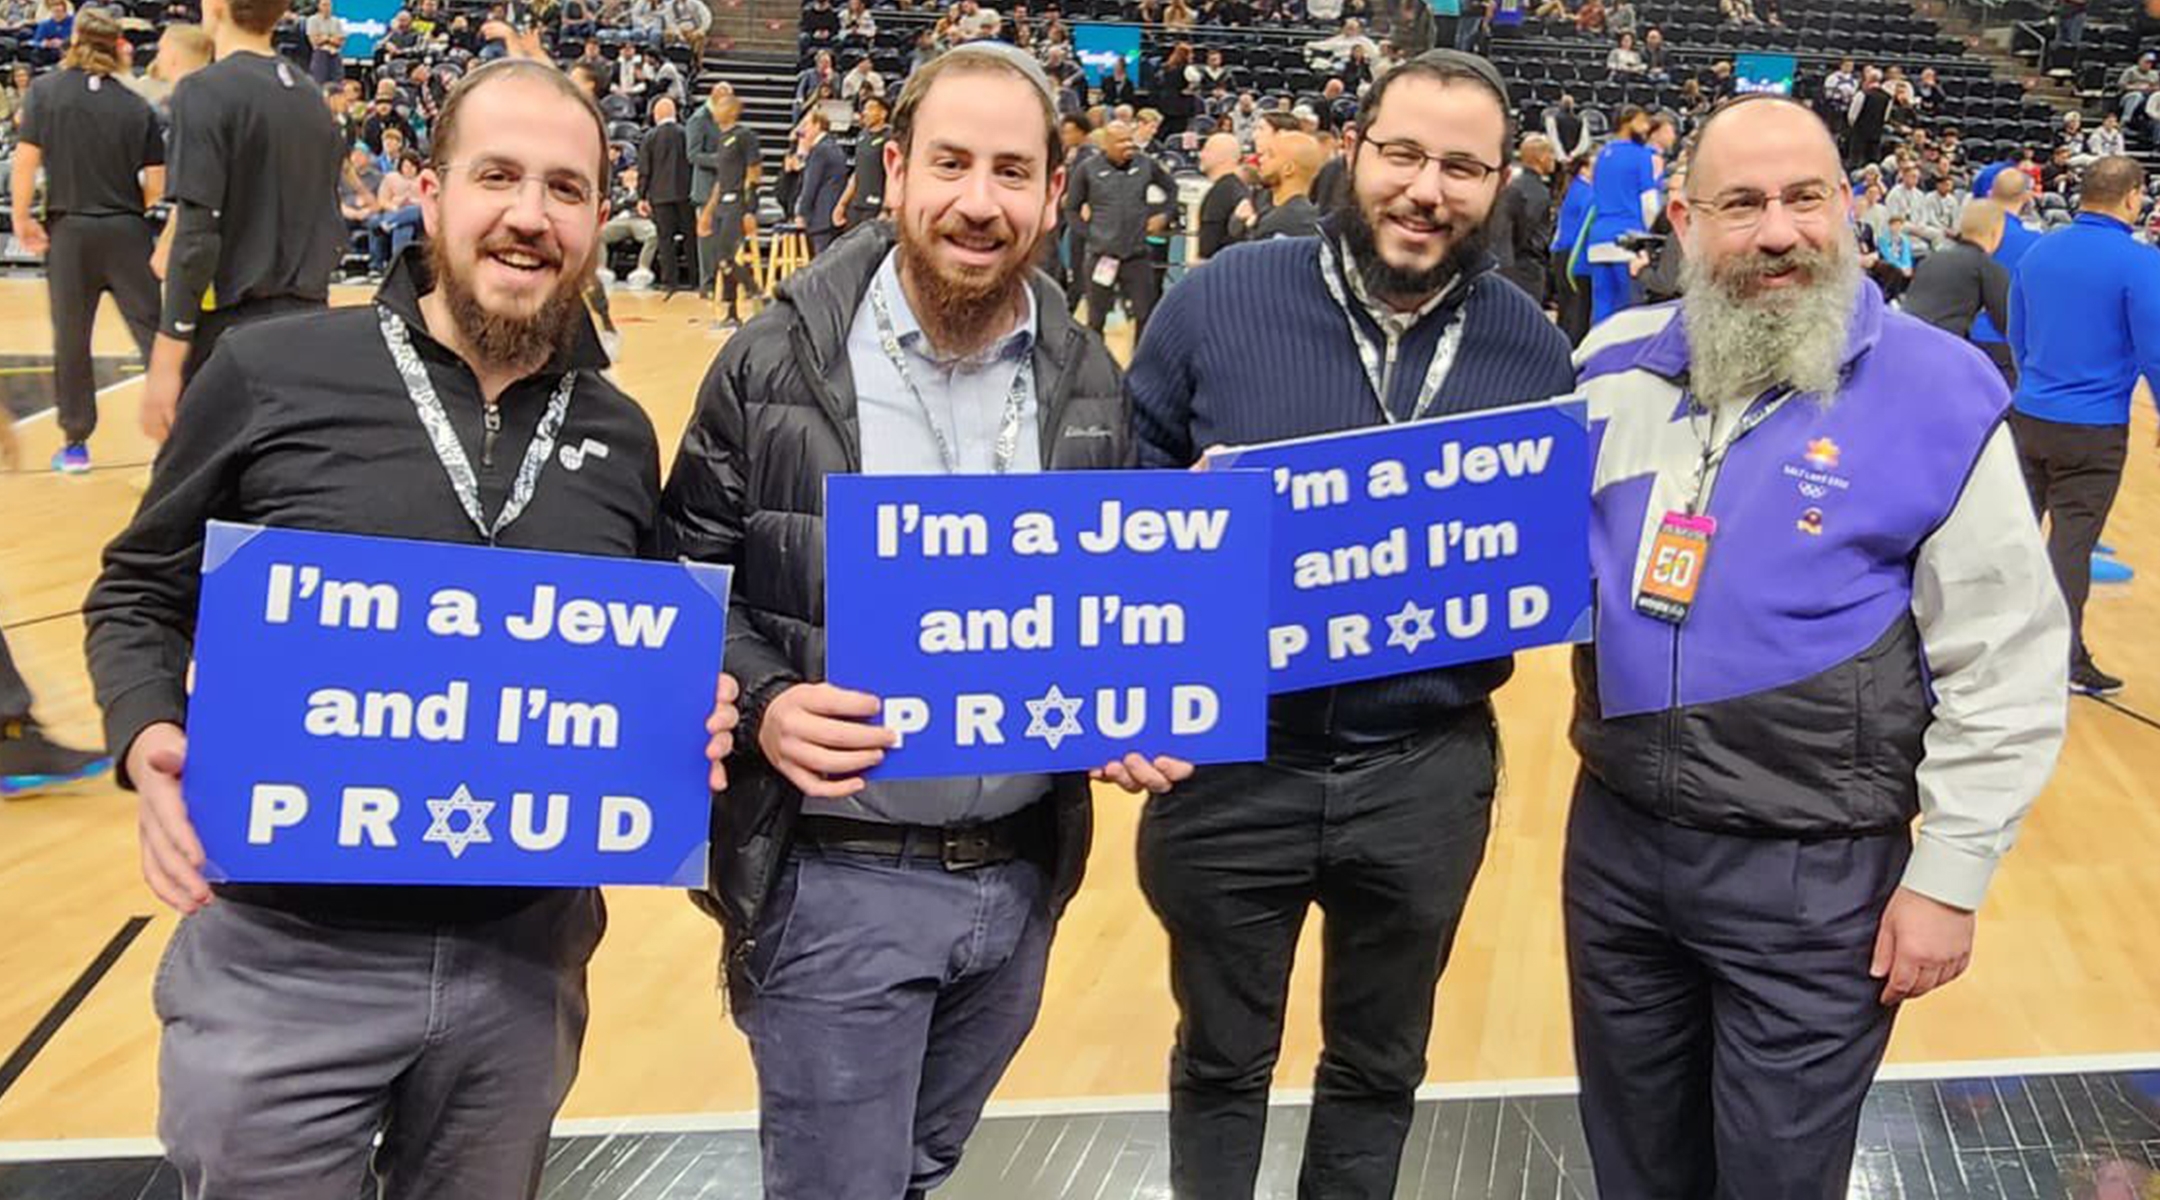 Rabbis holding signs saying "I'm a Jew and I'm proud"